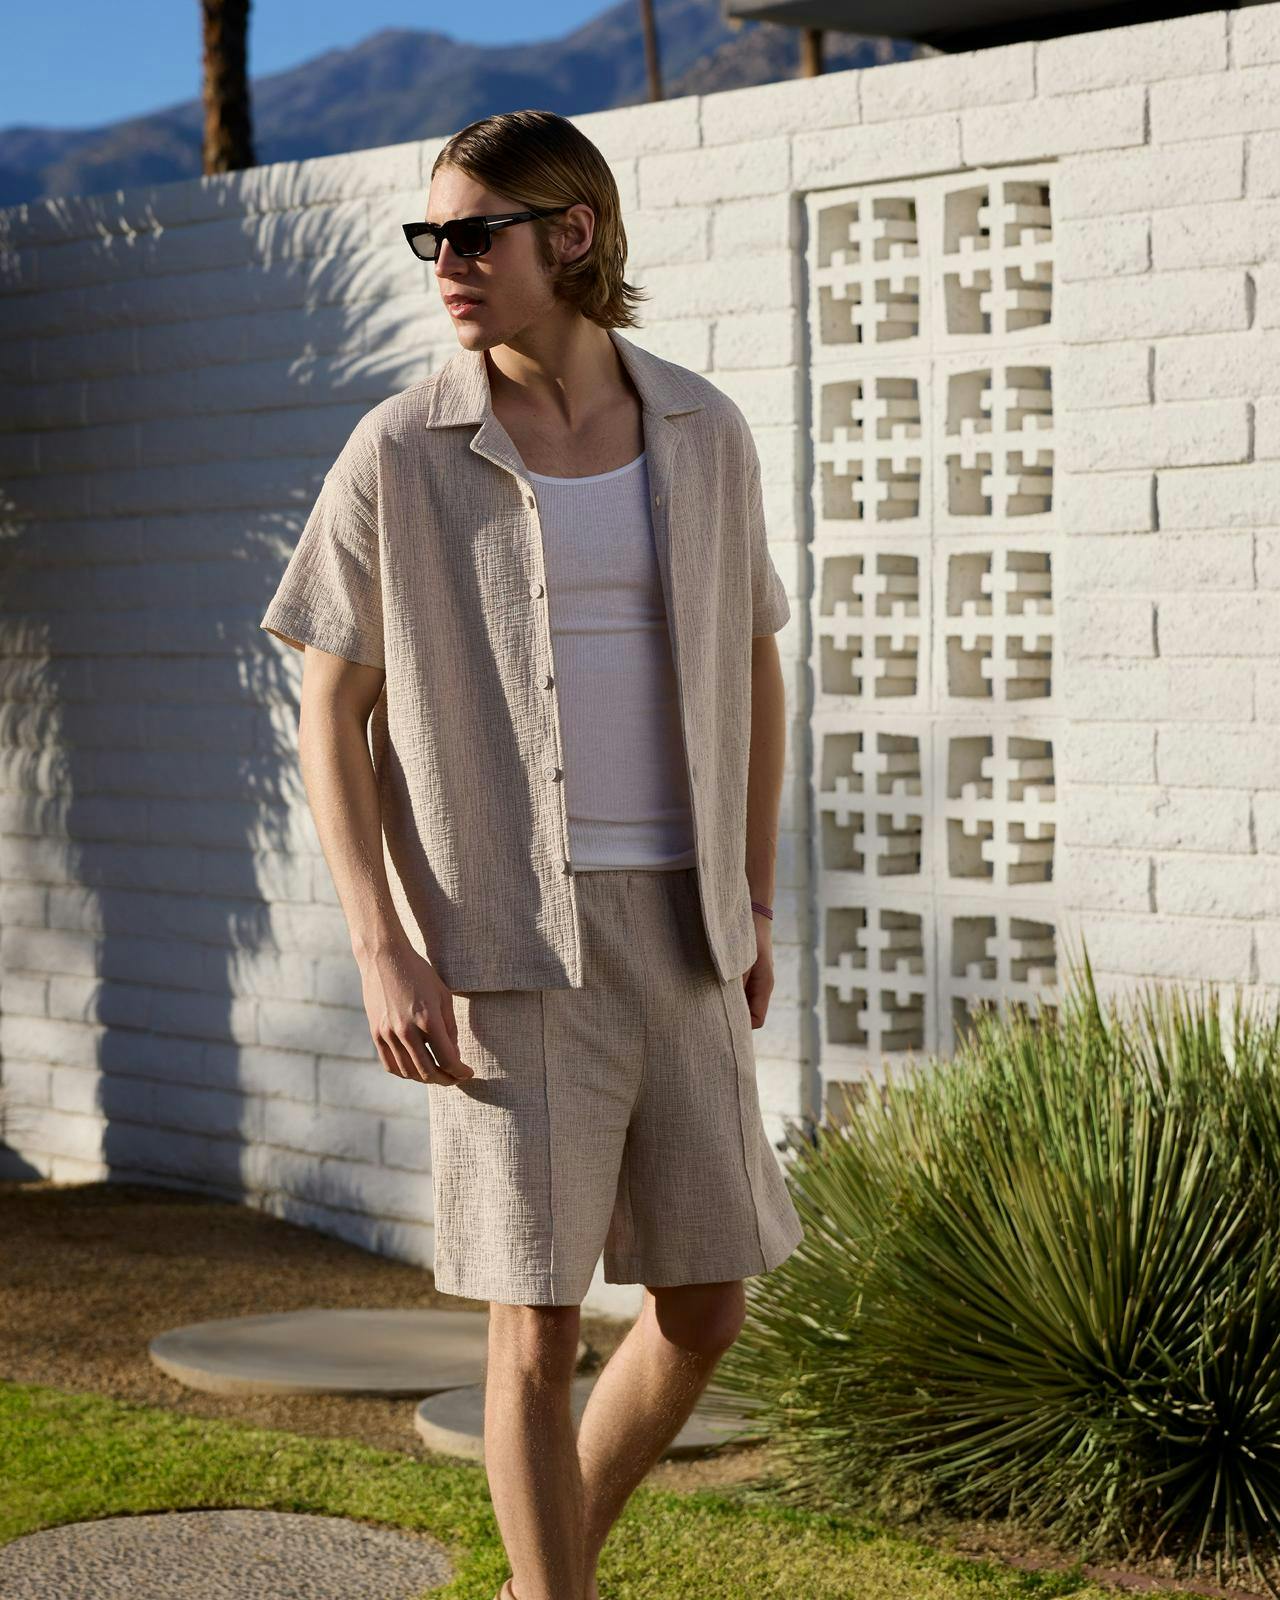 a man in shorts and sunglasses standing in front of a wall